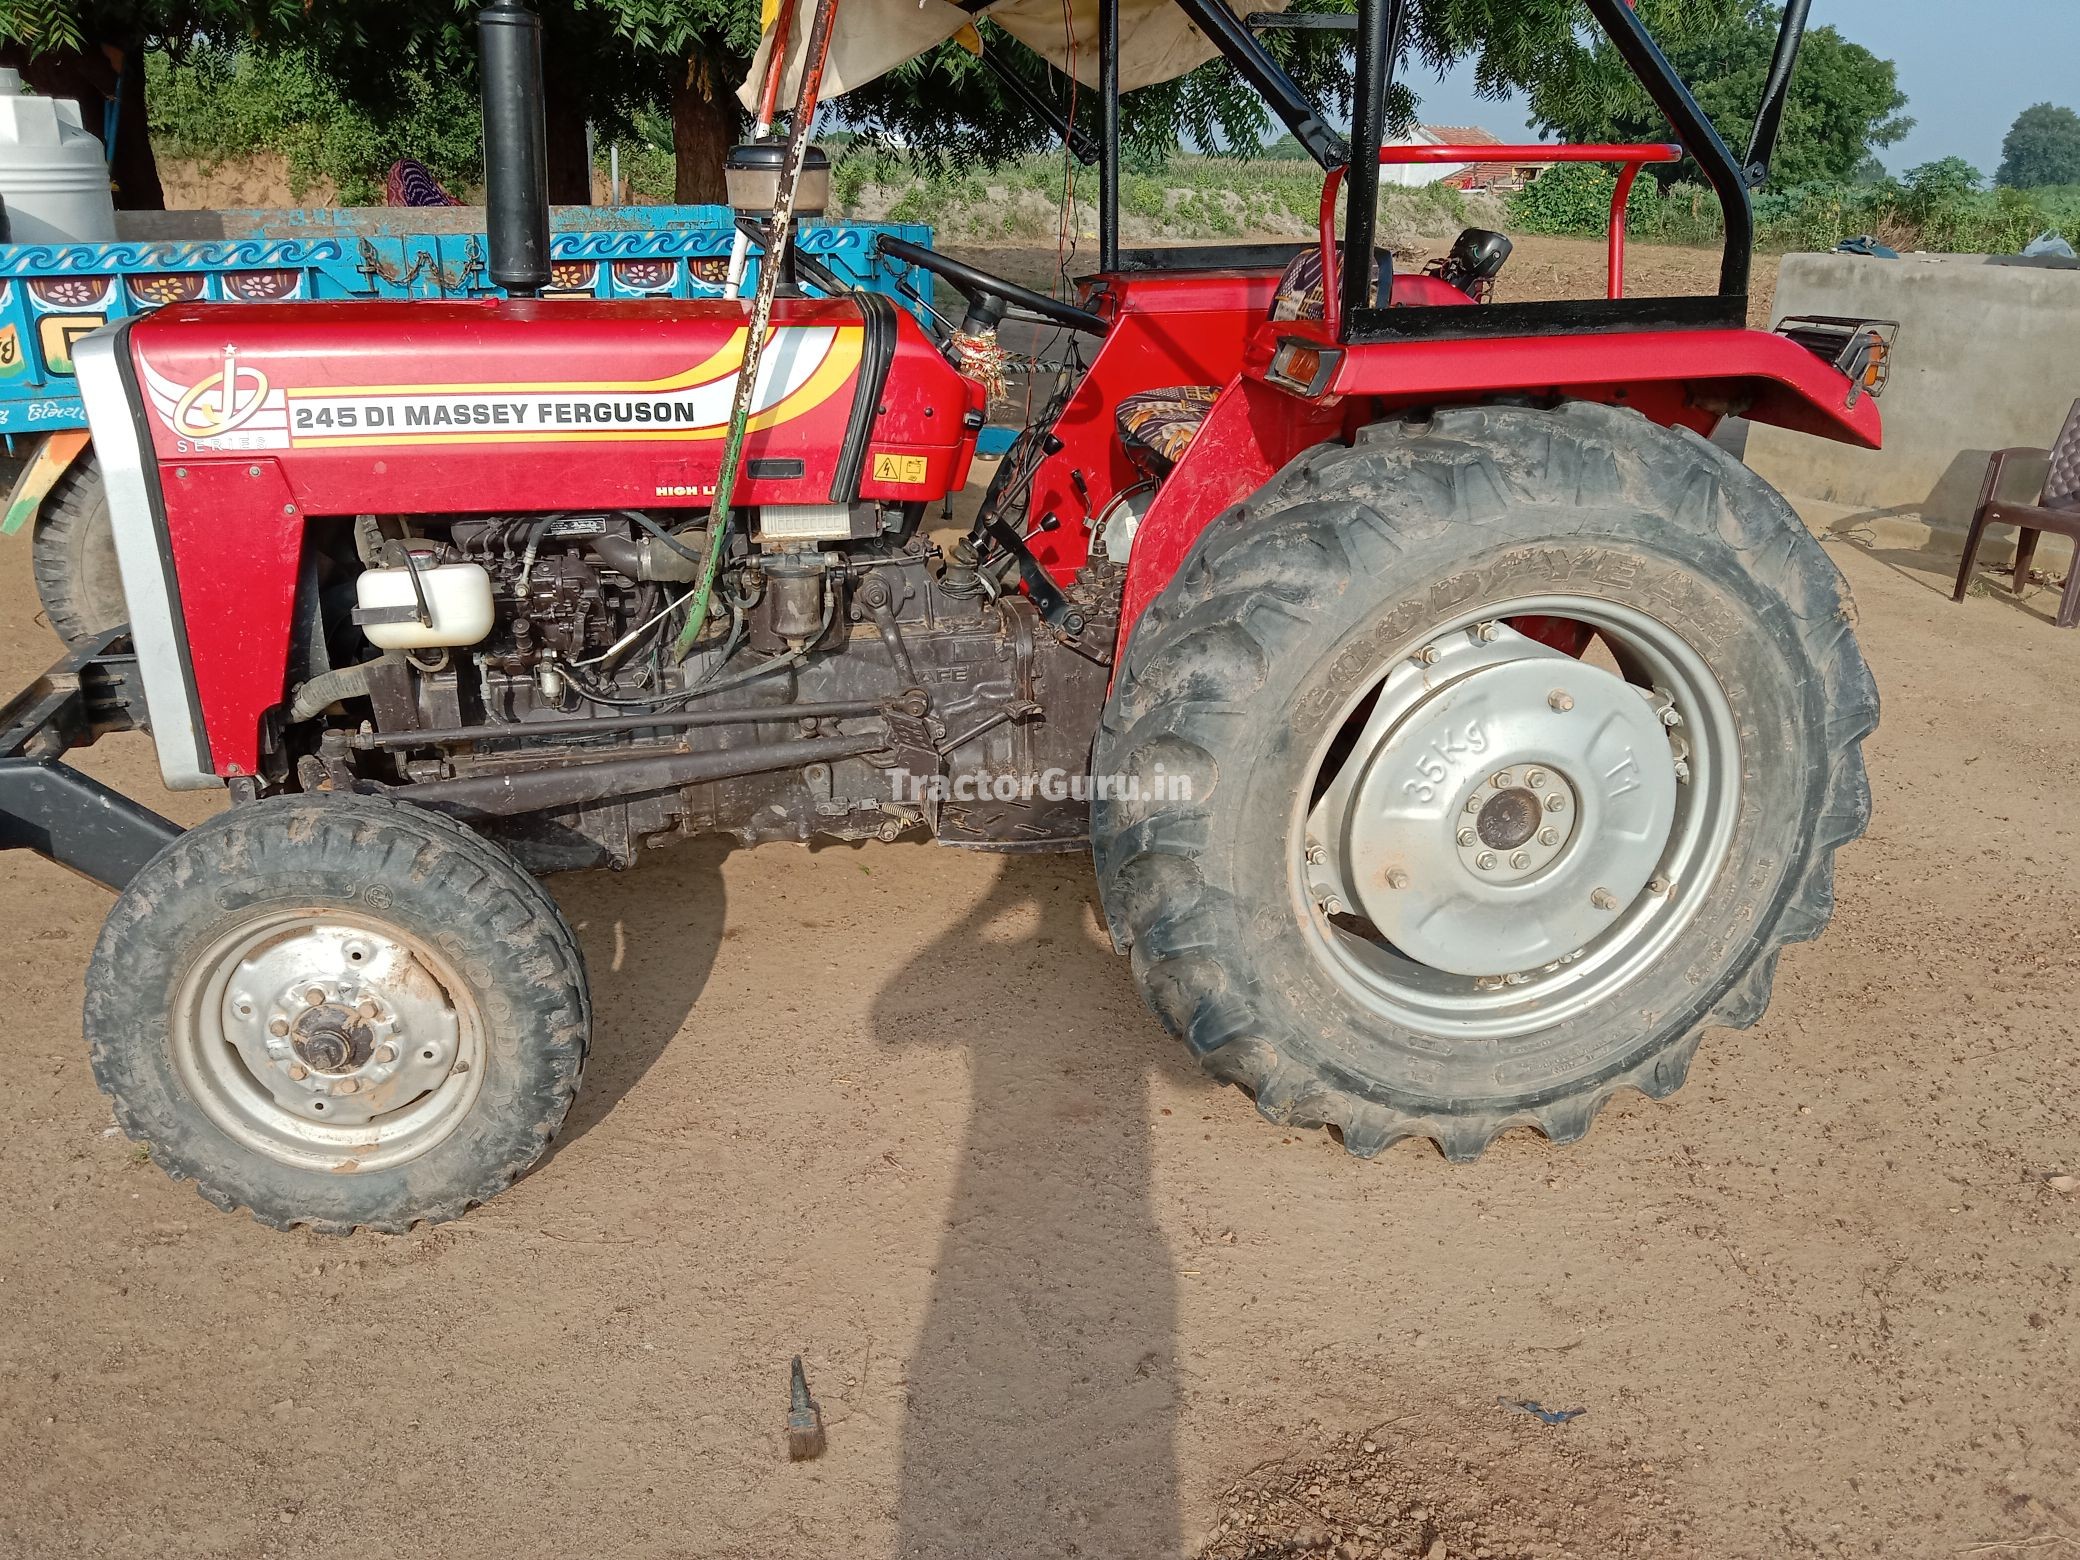 Get Second Hand Massey Ferguson 245 DI Tractor in Good Condition - 4712